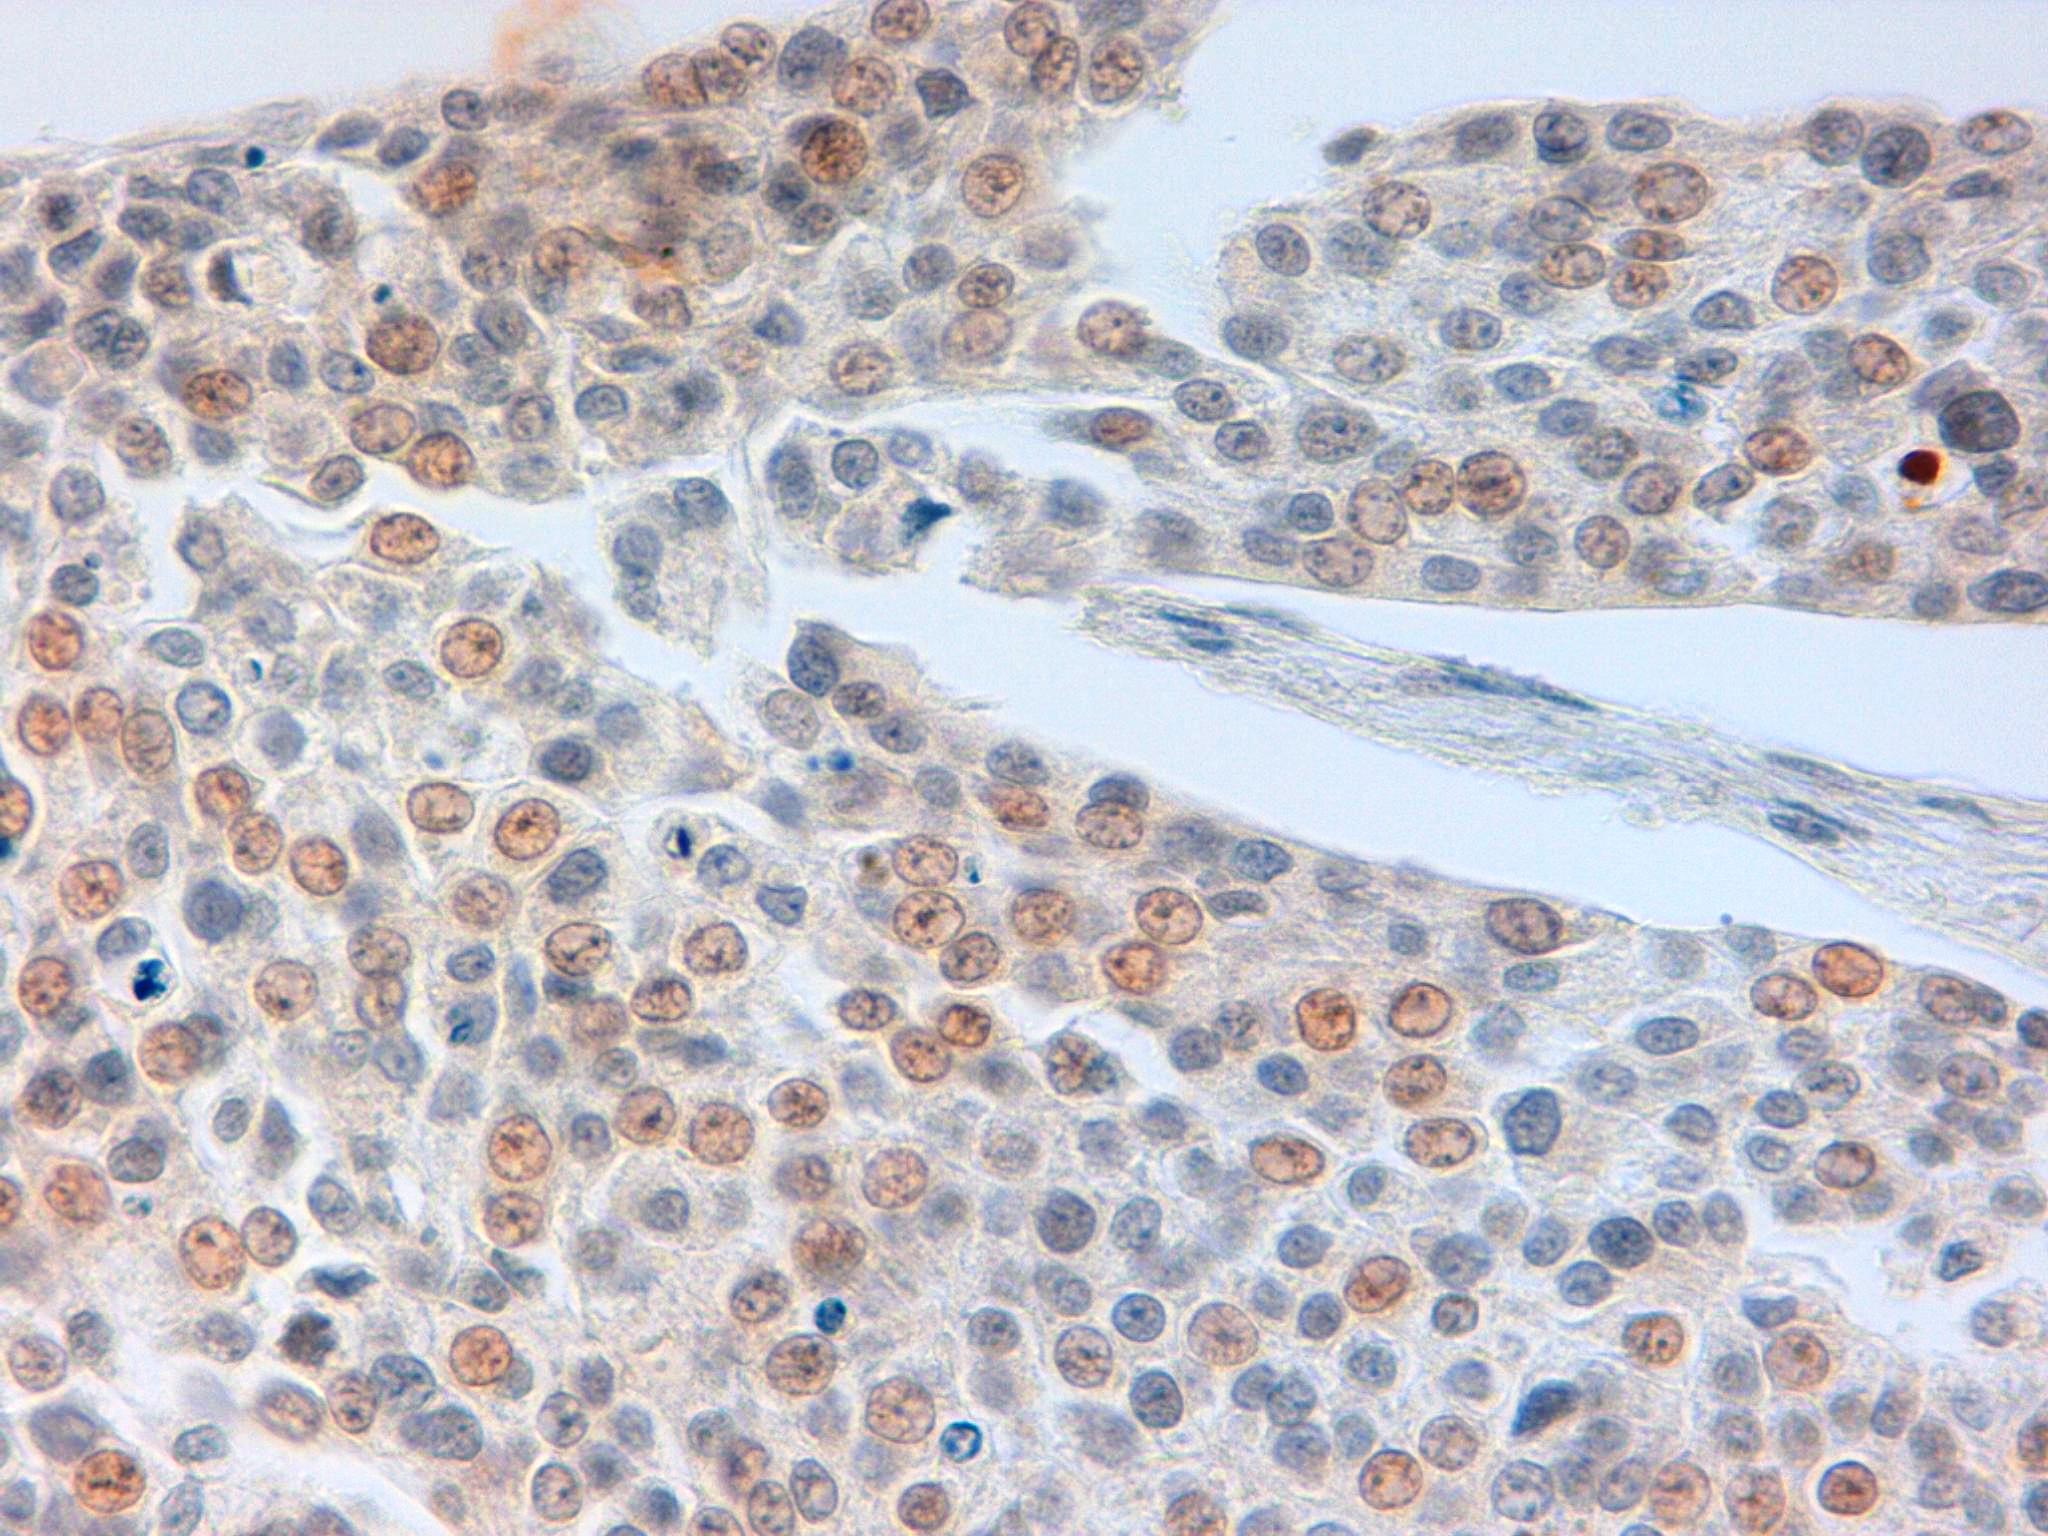 Immunohistochemical staining of FFPE human bladder tissue using phospho-Histone H2A.x (pS140) antibody at 5 µg/ml and antigen retrieval at pH 6.2.  Visualization using goat anti-rabbit HRP secondary antibody and DAB substrate.  Pathologists Comments: Good nuclear reactivity at pH 6.2 for bladder (very nice and clear).  We can confirm that nuclear activity is good and sharp.